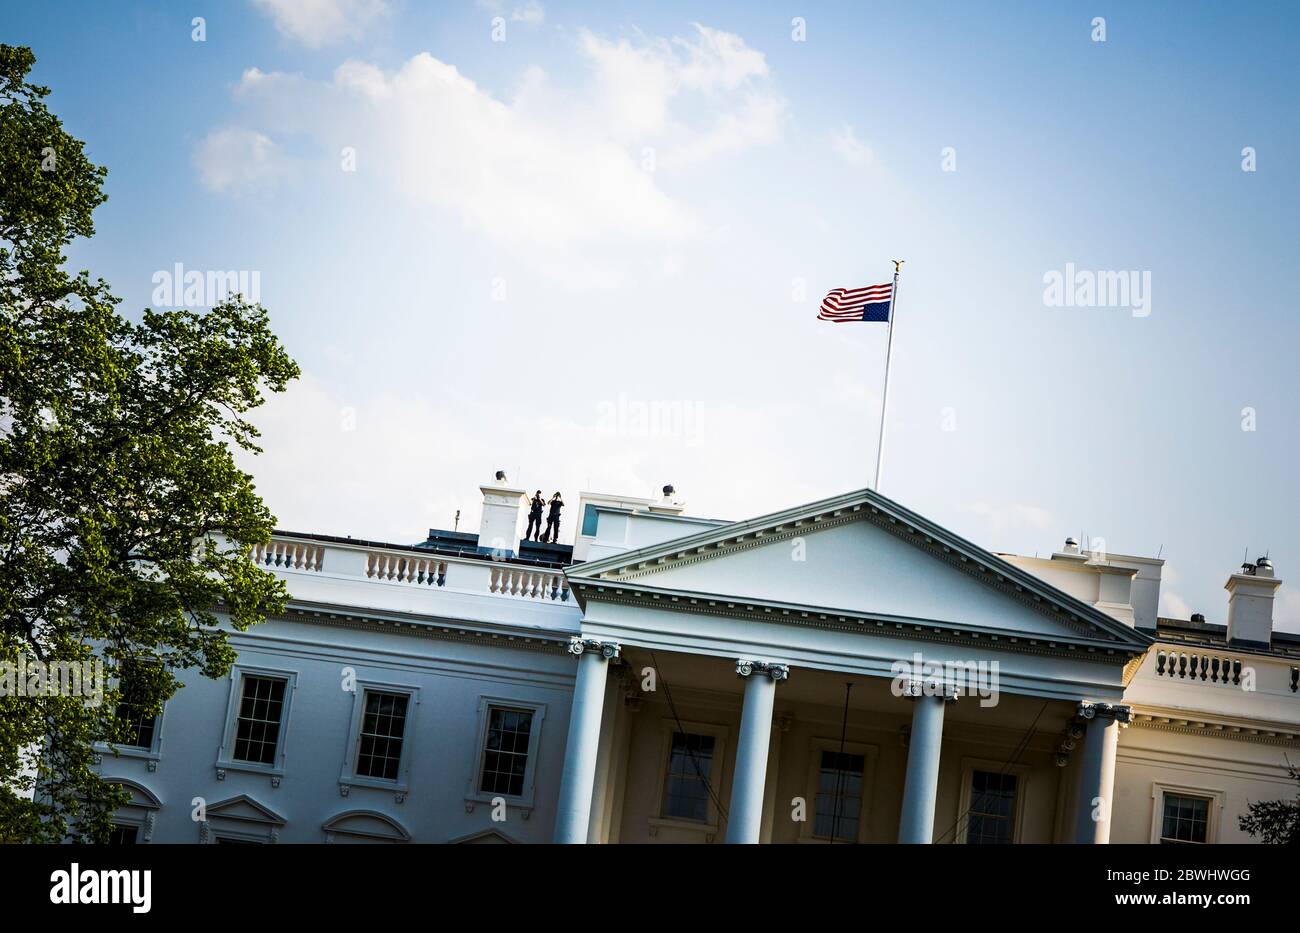 The White House with two security men on the roof with binoculars and American flag turned upside down (concept of distress), Washington DC, USA. Stock Photo